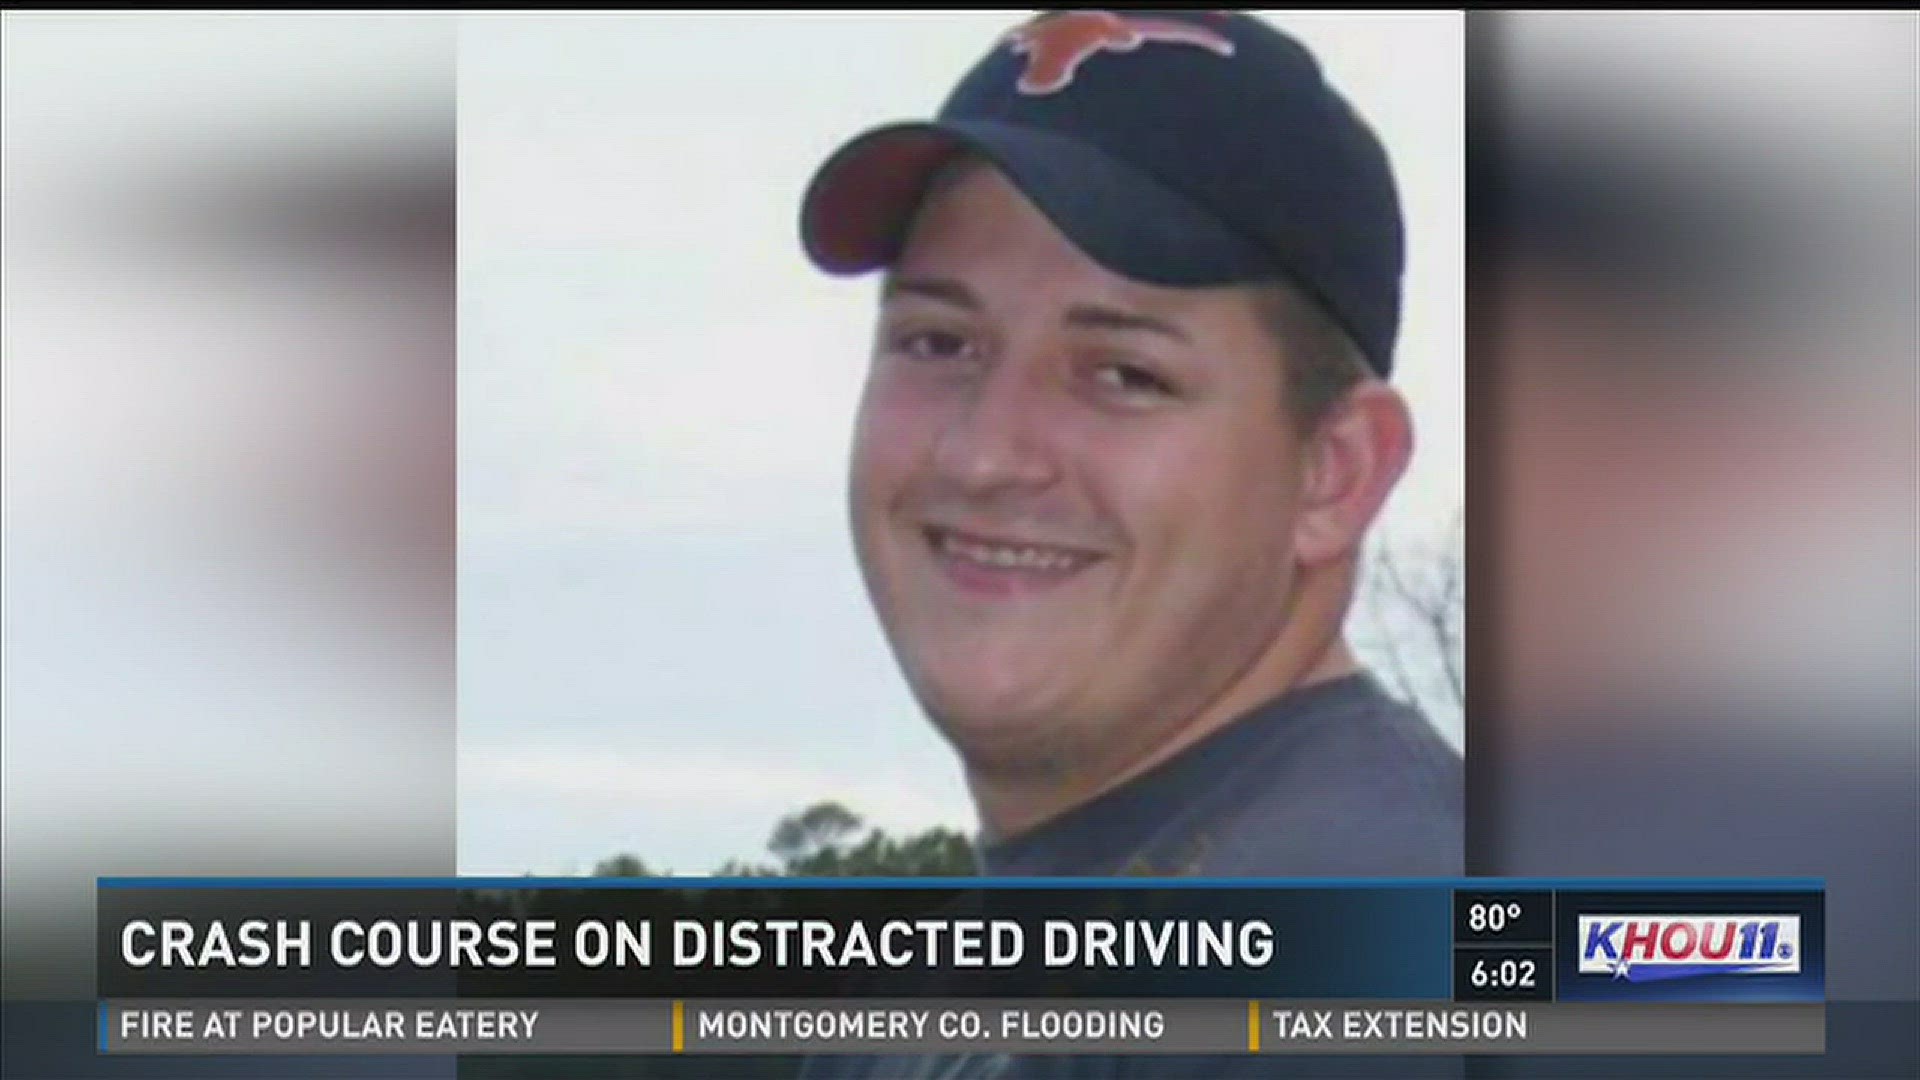 The mother of a victim in a distracted driving crash is sharing her story as part of a TxDOT campaign to encourage people not to text drive.